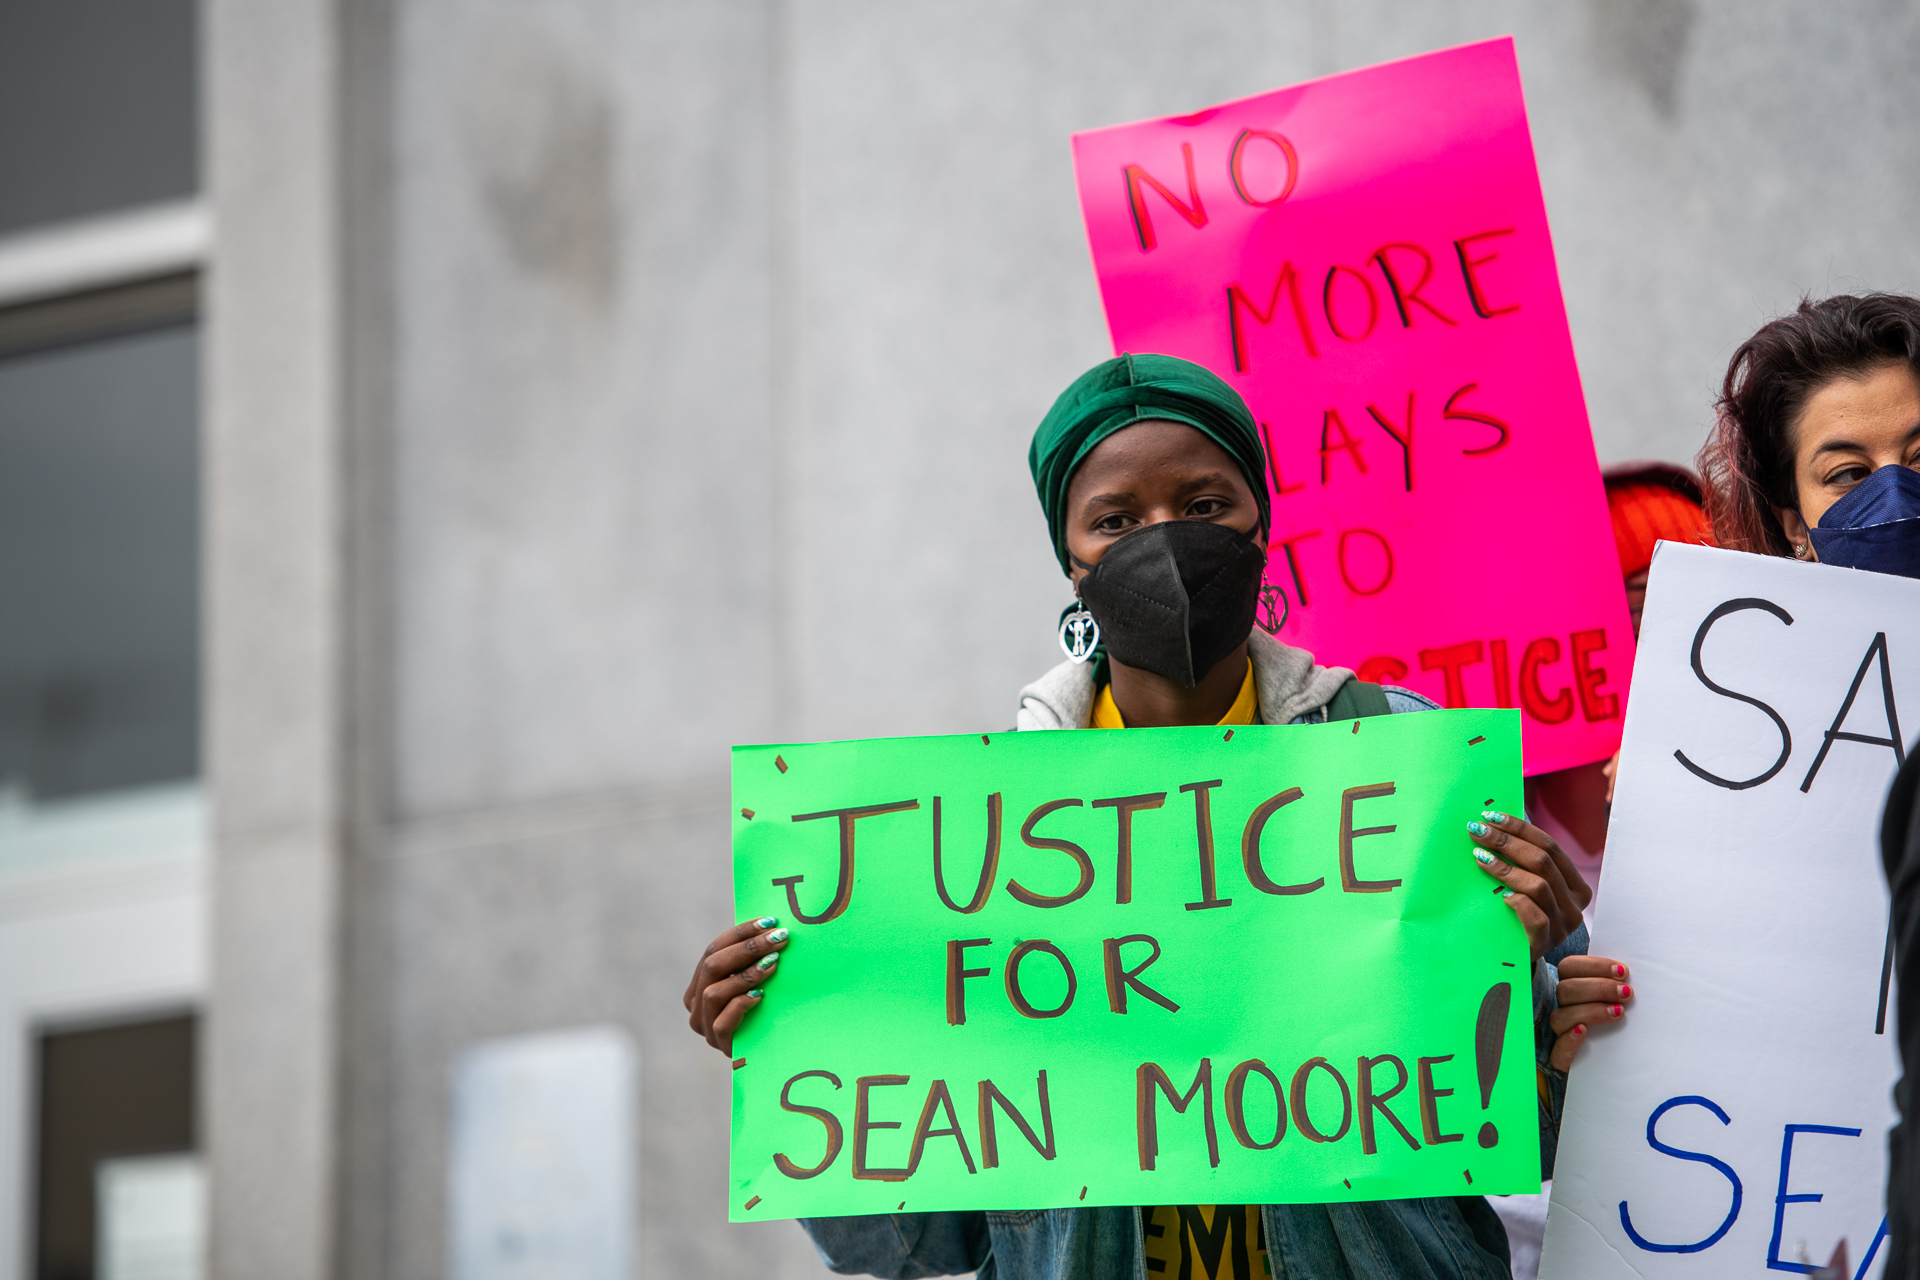 A woman with a green headscarf and black face mask holds a green sign that reads, "Justice for Sean Moore!"